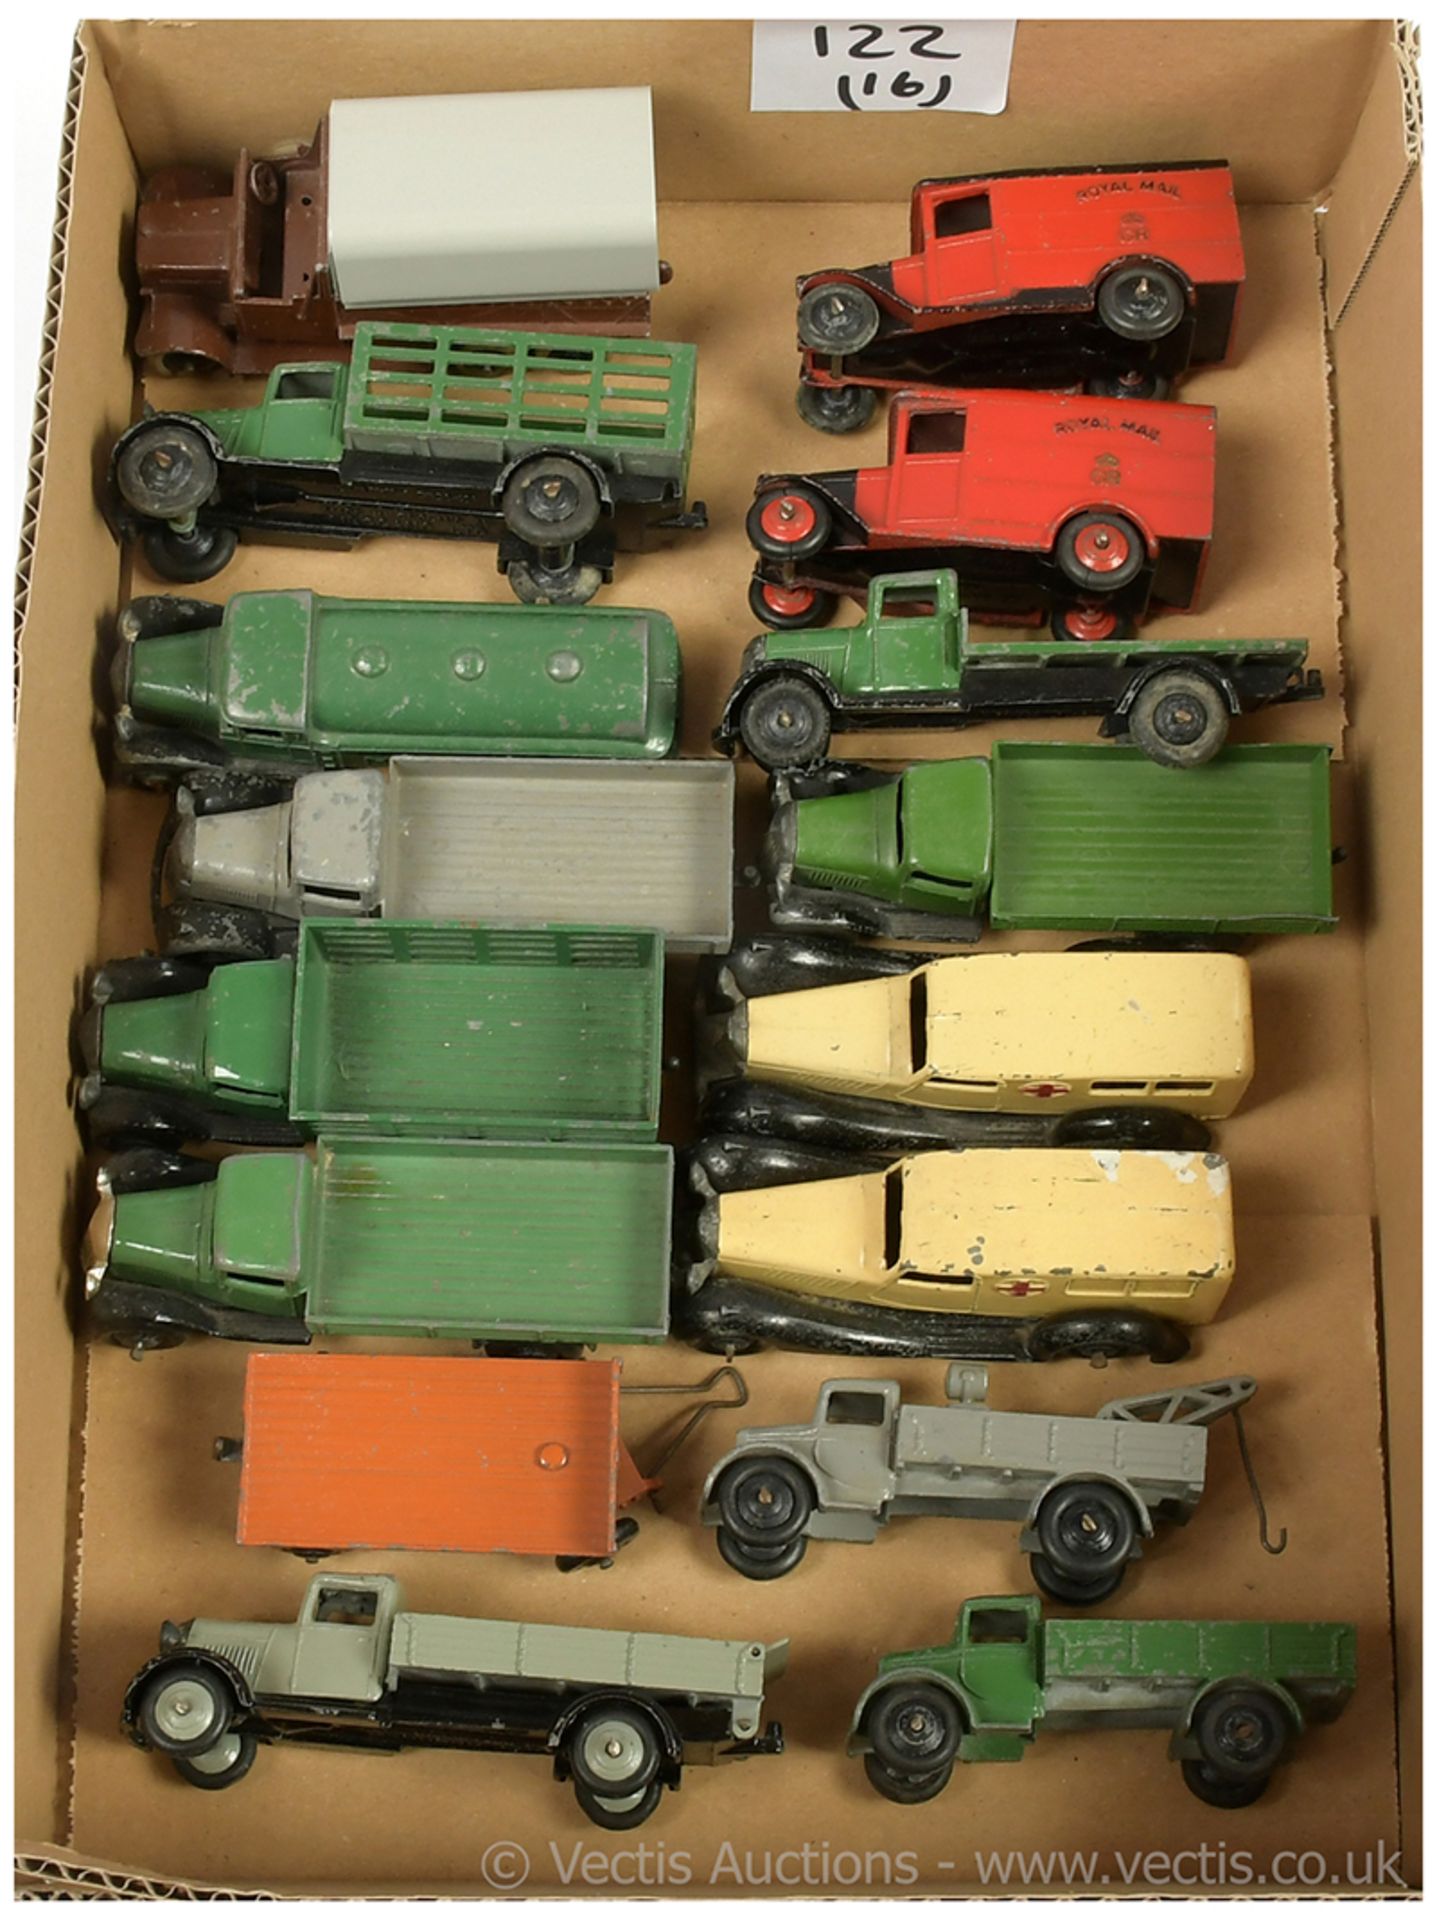 GRP inc Dinky unboxed 22 Series Openback Truck